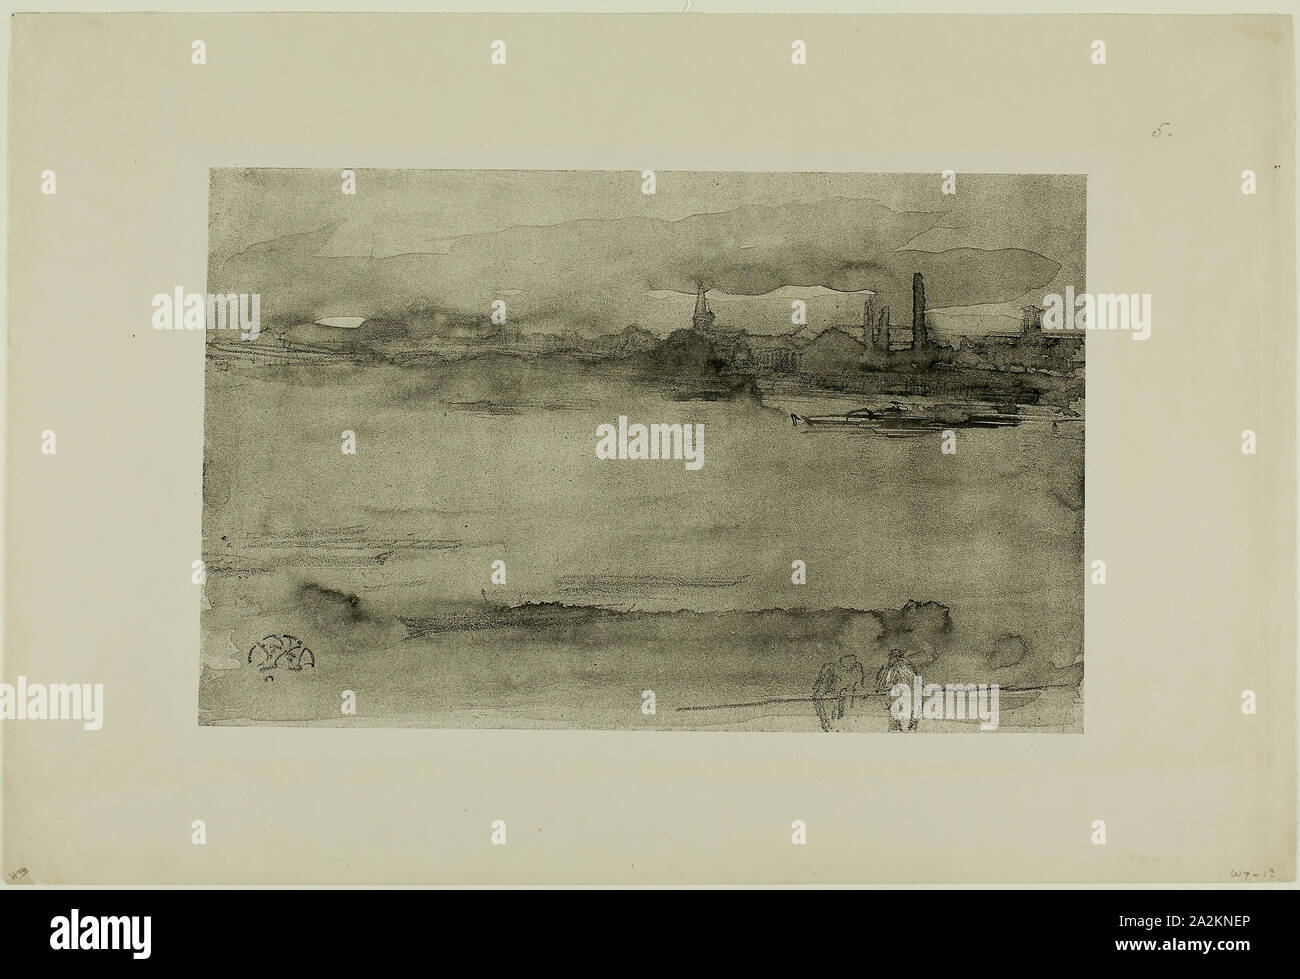 Early Morning, 1878, James McNeill Whistler, American, 1834-1903, United States, Lithotint with scraping, on a prepared half-tint ground, in black on cream wove proofing paper, 165 x 269 mm (image), 256 x 379 mm (sheet Stock Photo